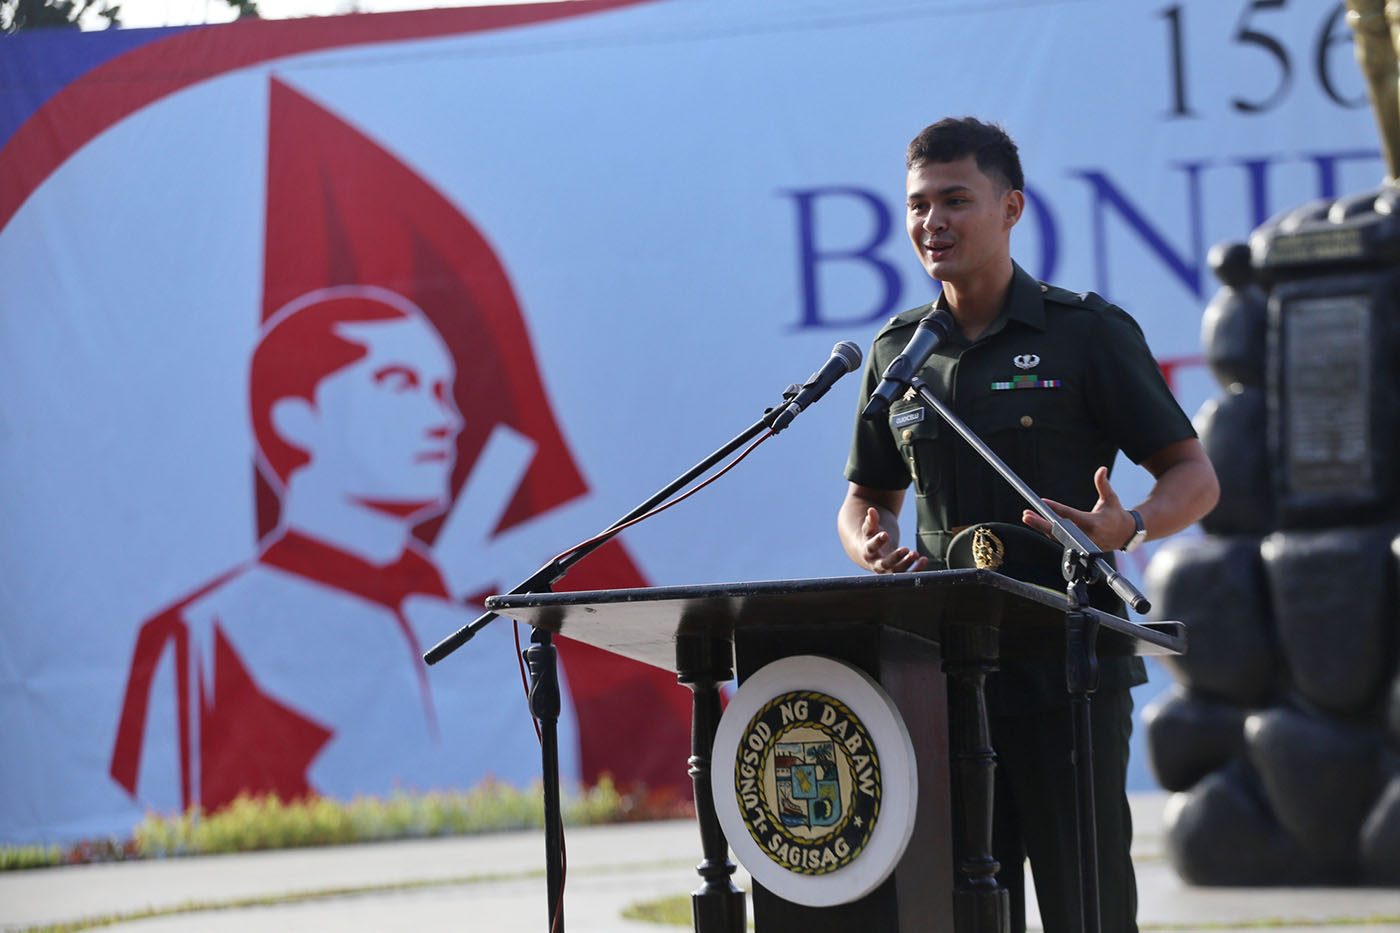 LOOK: Matteo Guidicelli is guest of honor at Davao City Bonifacio Day celebration